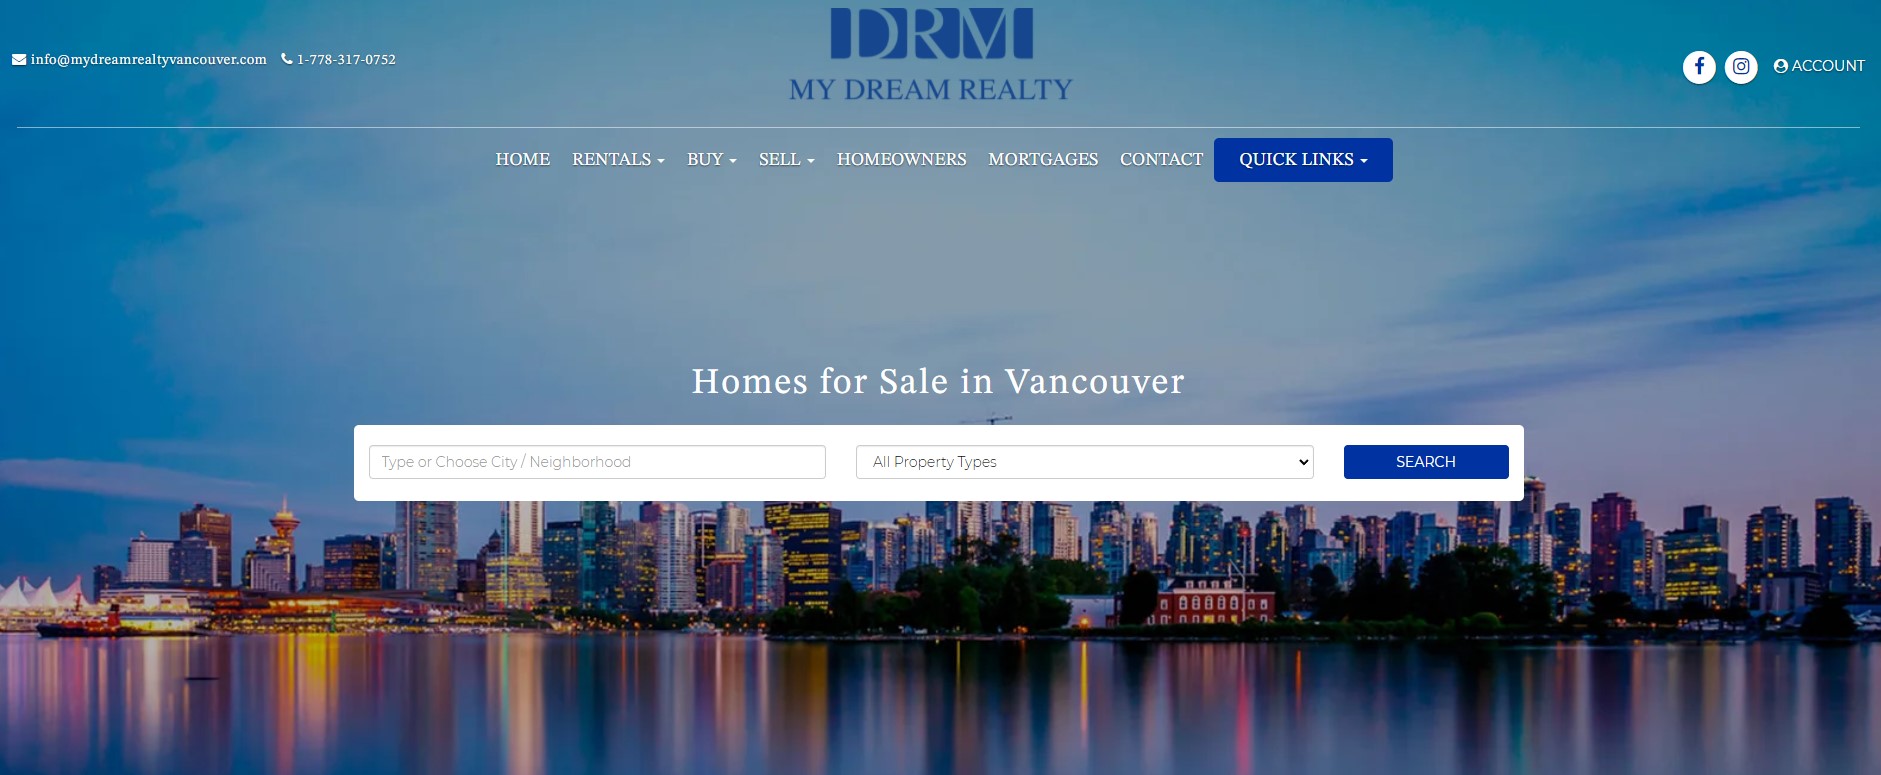 My Dream Realty Homepage